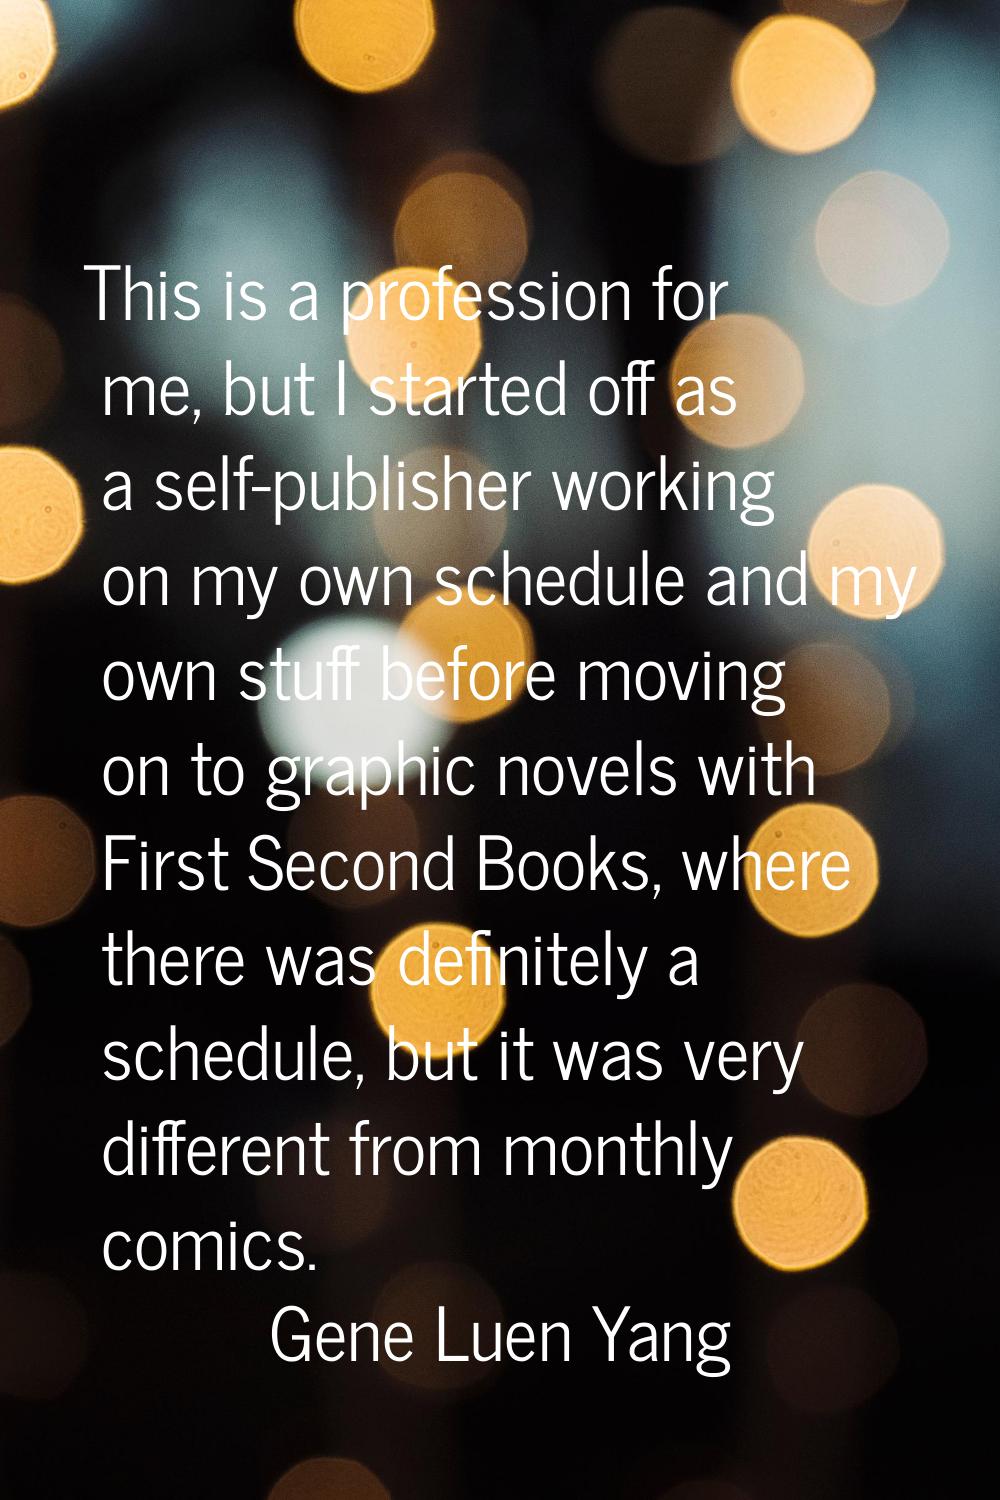 This is a profession for me, but I started off as a self-publisher working on my own schedule and m